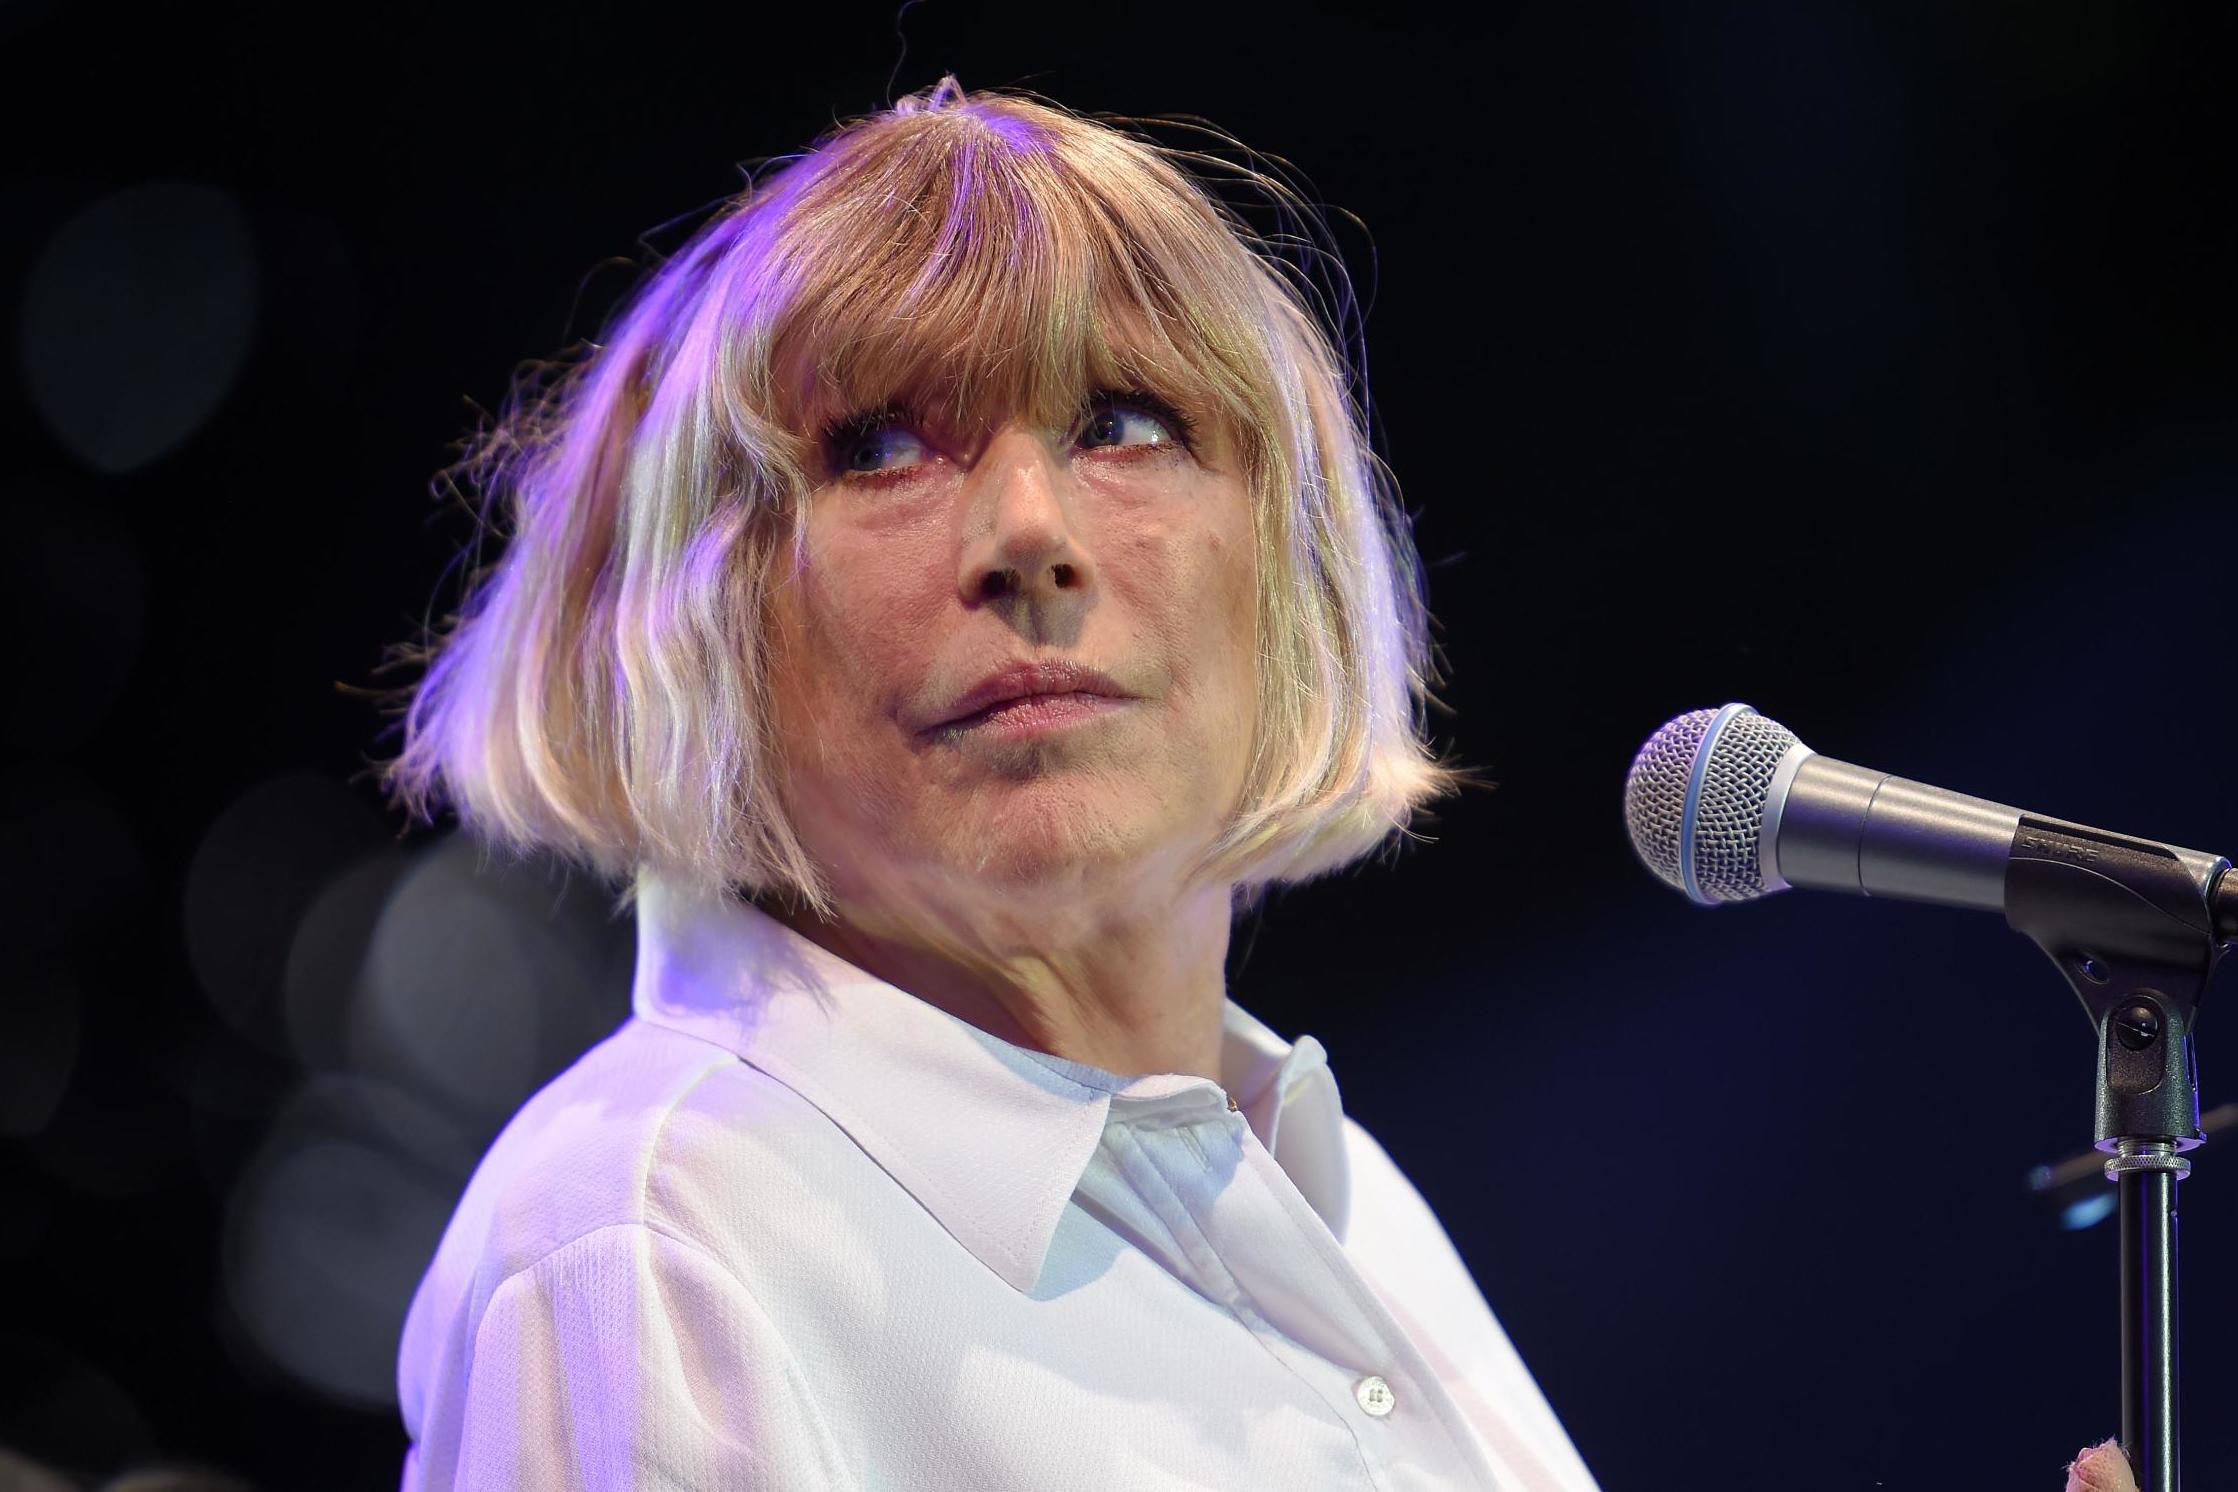 Marianne Faithfull performs on 8 July 2016 in Cognac, France.